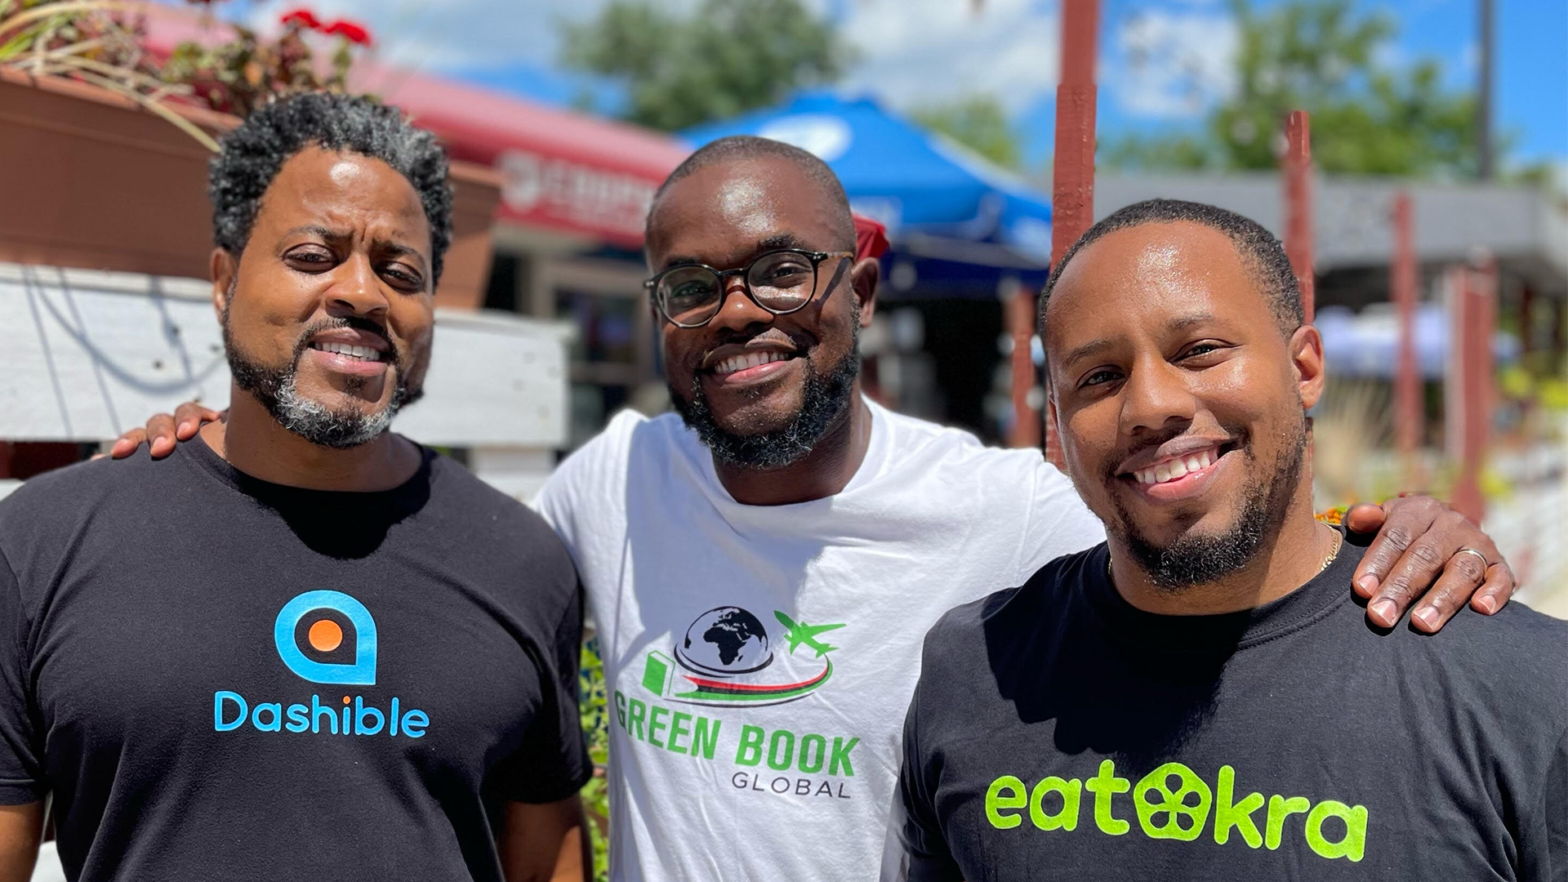 Founders Of Green Book Global, EatOkra, And Dashible Unite To Highlight Harlem Restaurants Throughout Black Business Month